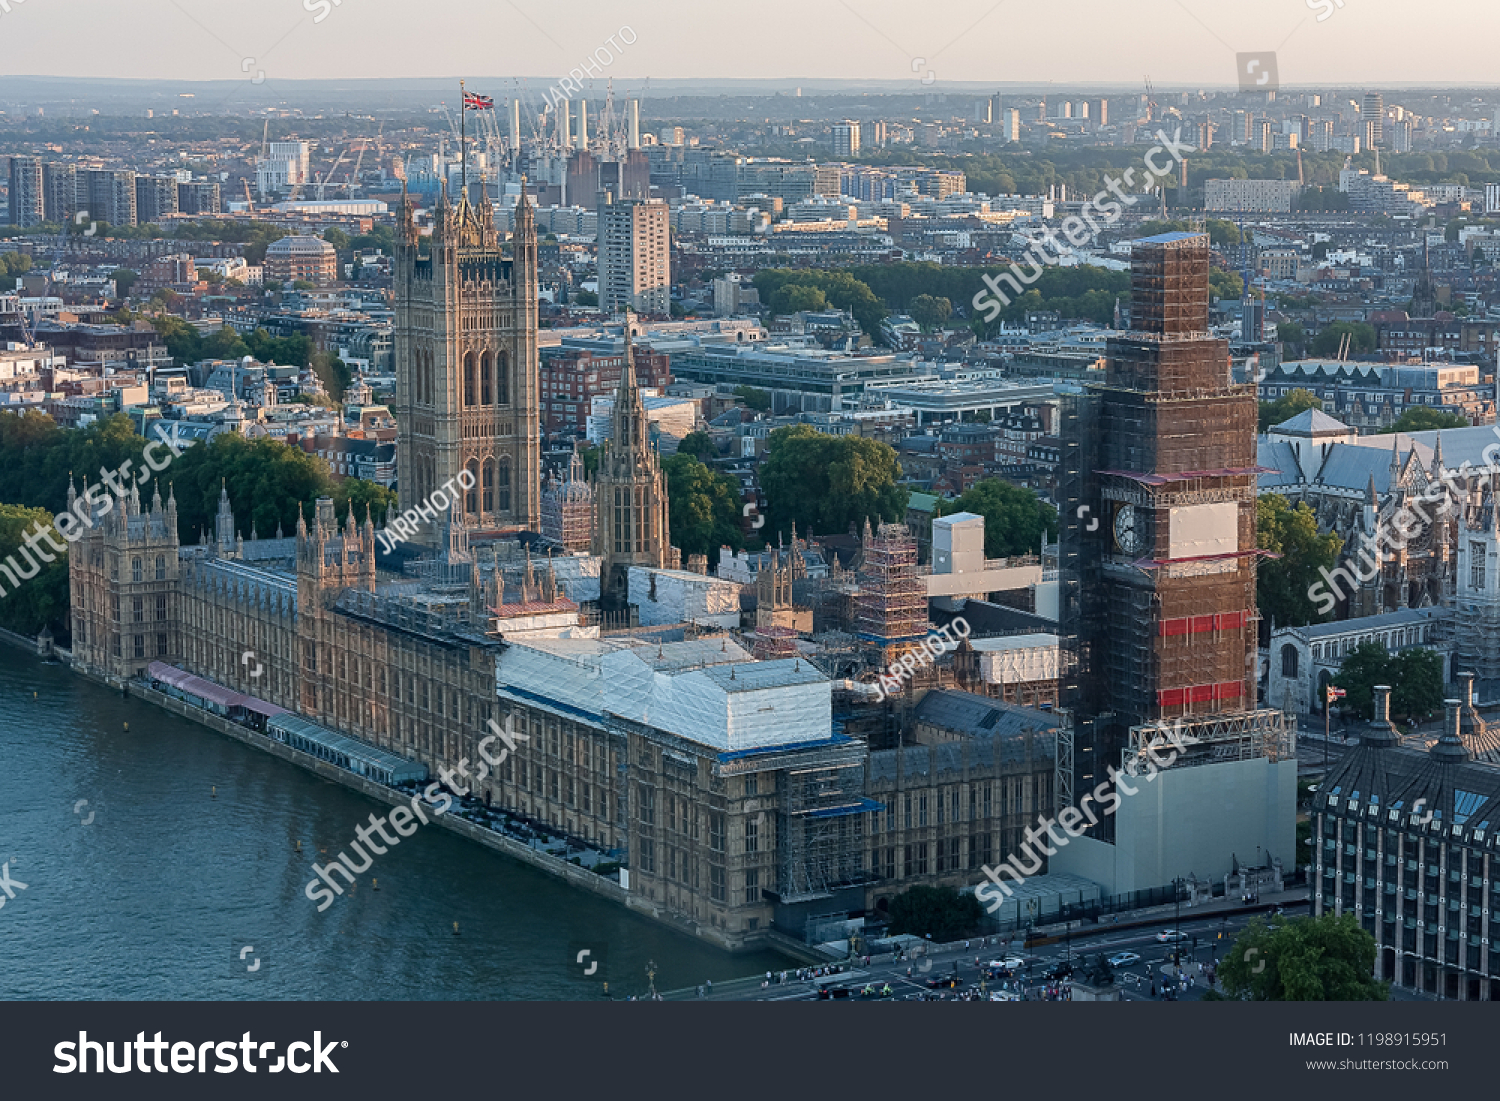 the london parliament with the bigben under construction and general view of the Thames River #1198915951